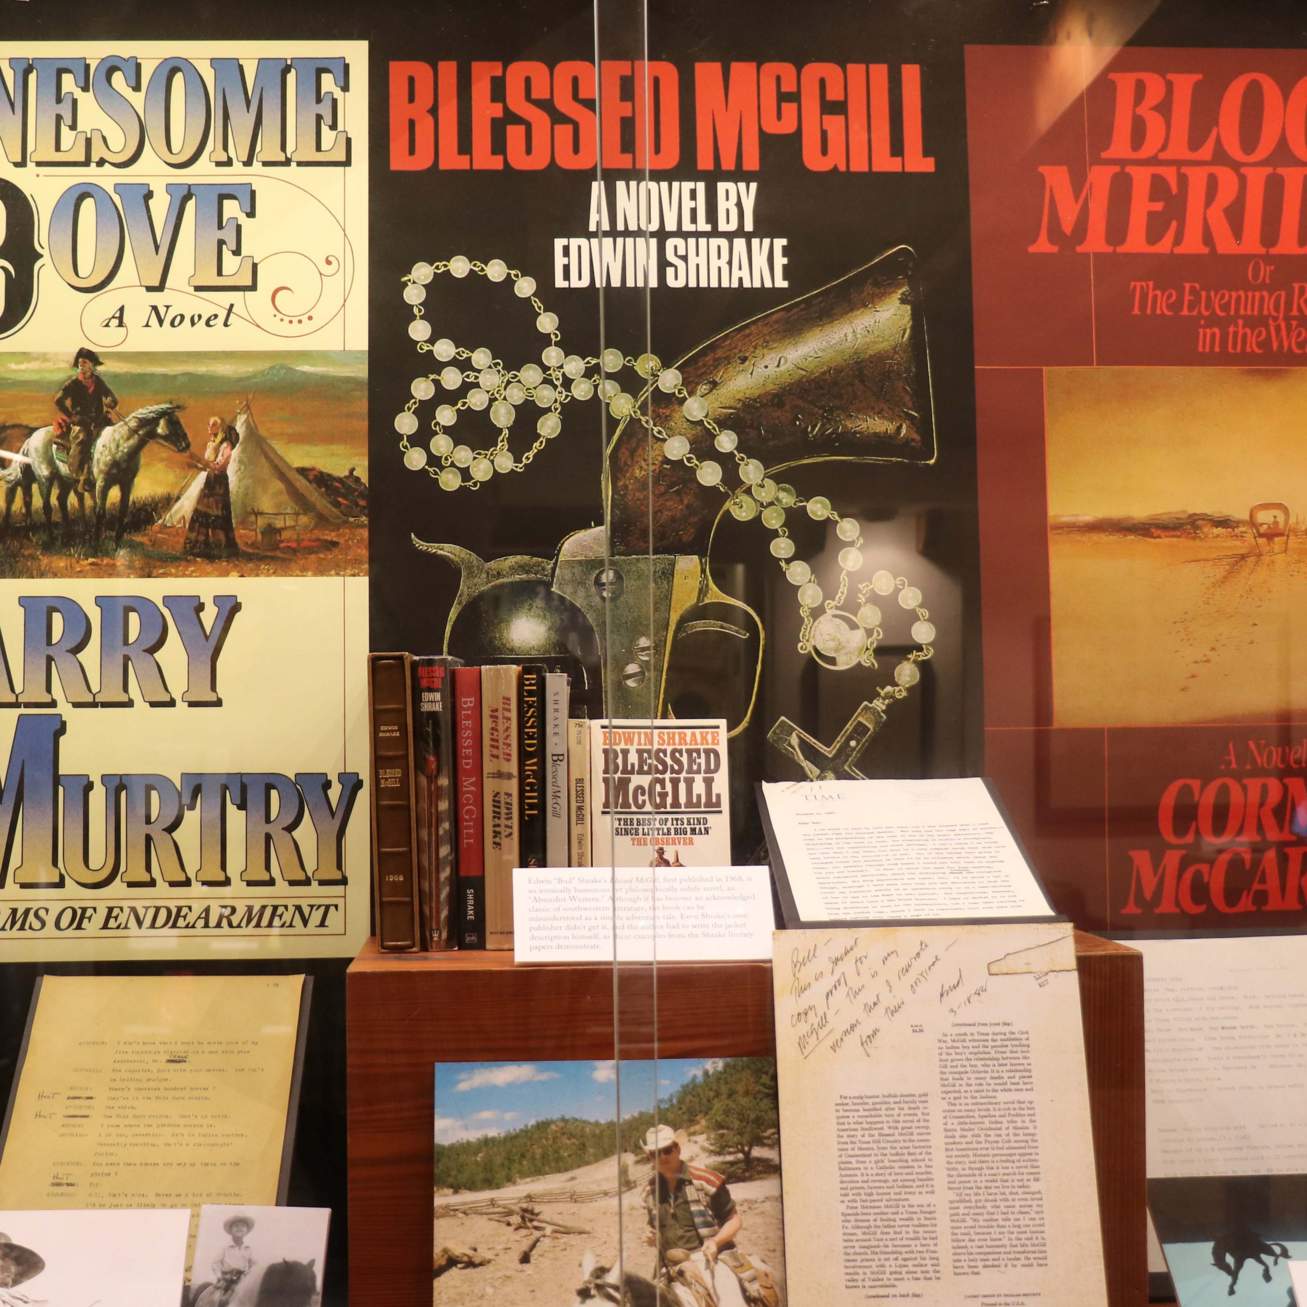 Lonesome Dove, Blessed McGill and Blood Meridian book covers